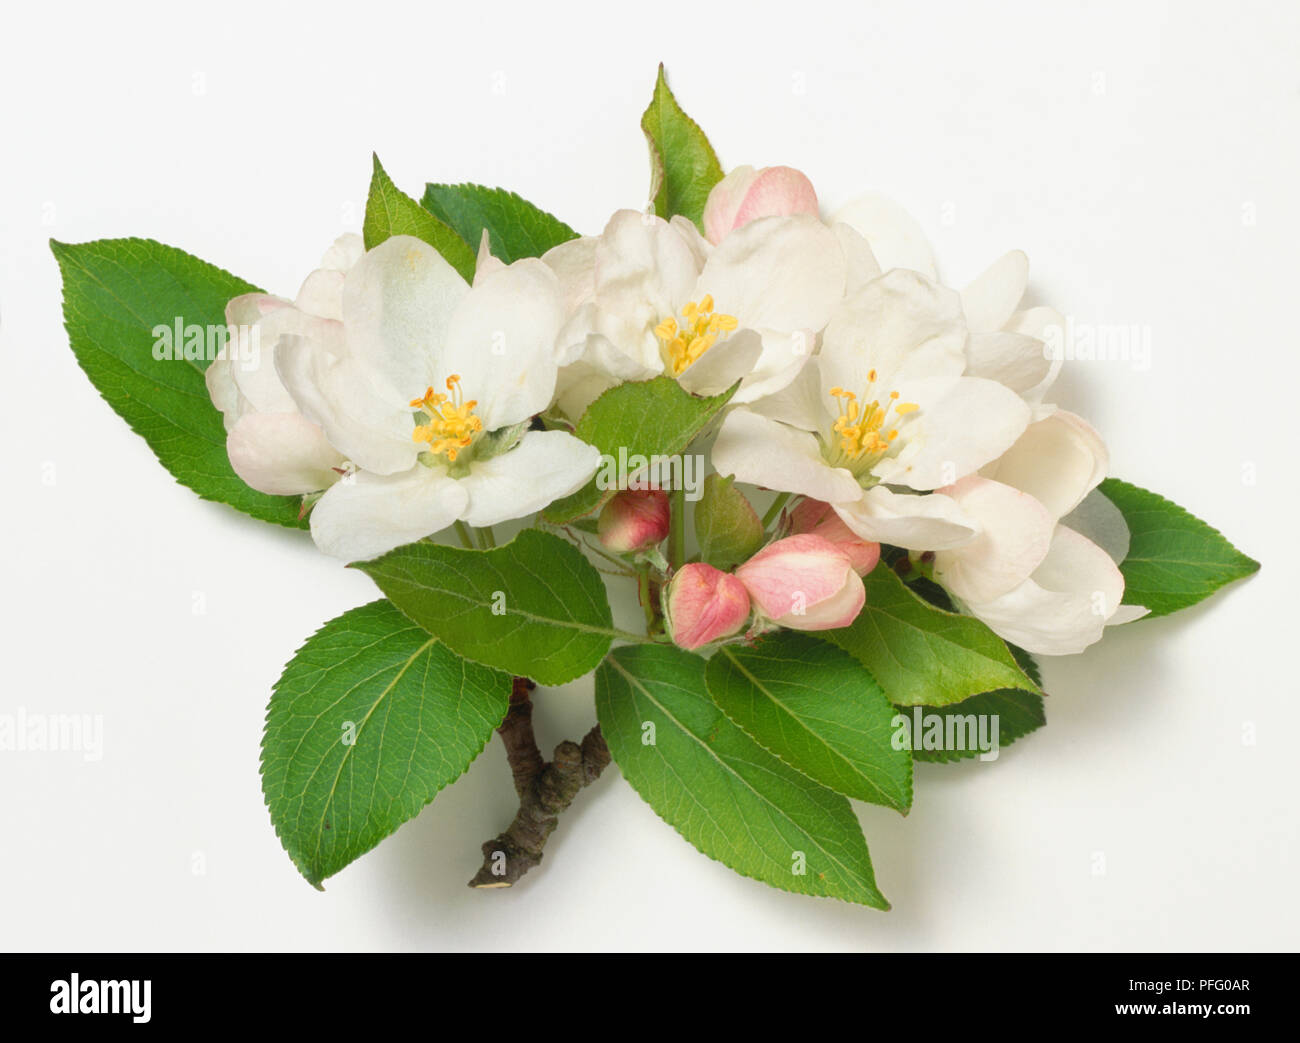 Rosaceae, Malus prunifolia, dark stem with toothed green leaves, pink buds and white flowers borne in compact clusters. Stock Photo